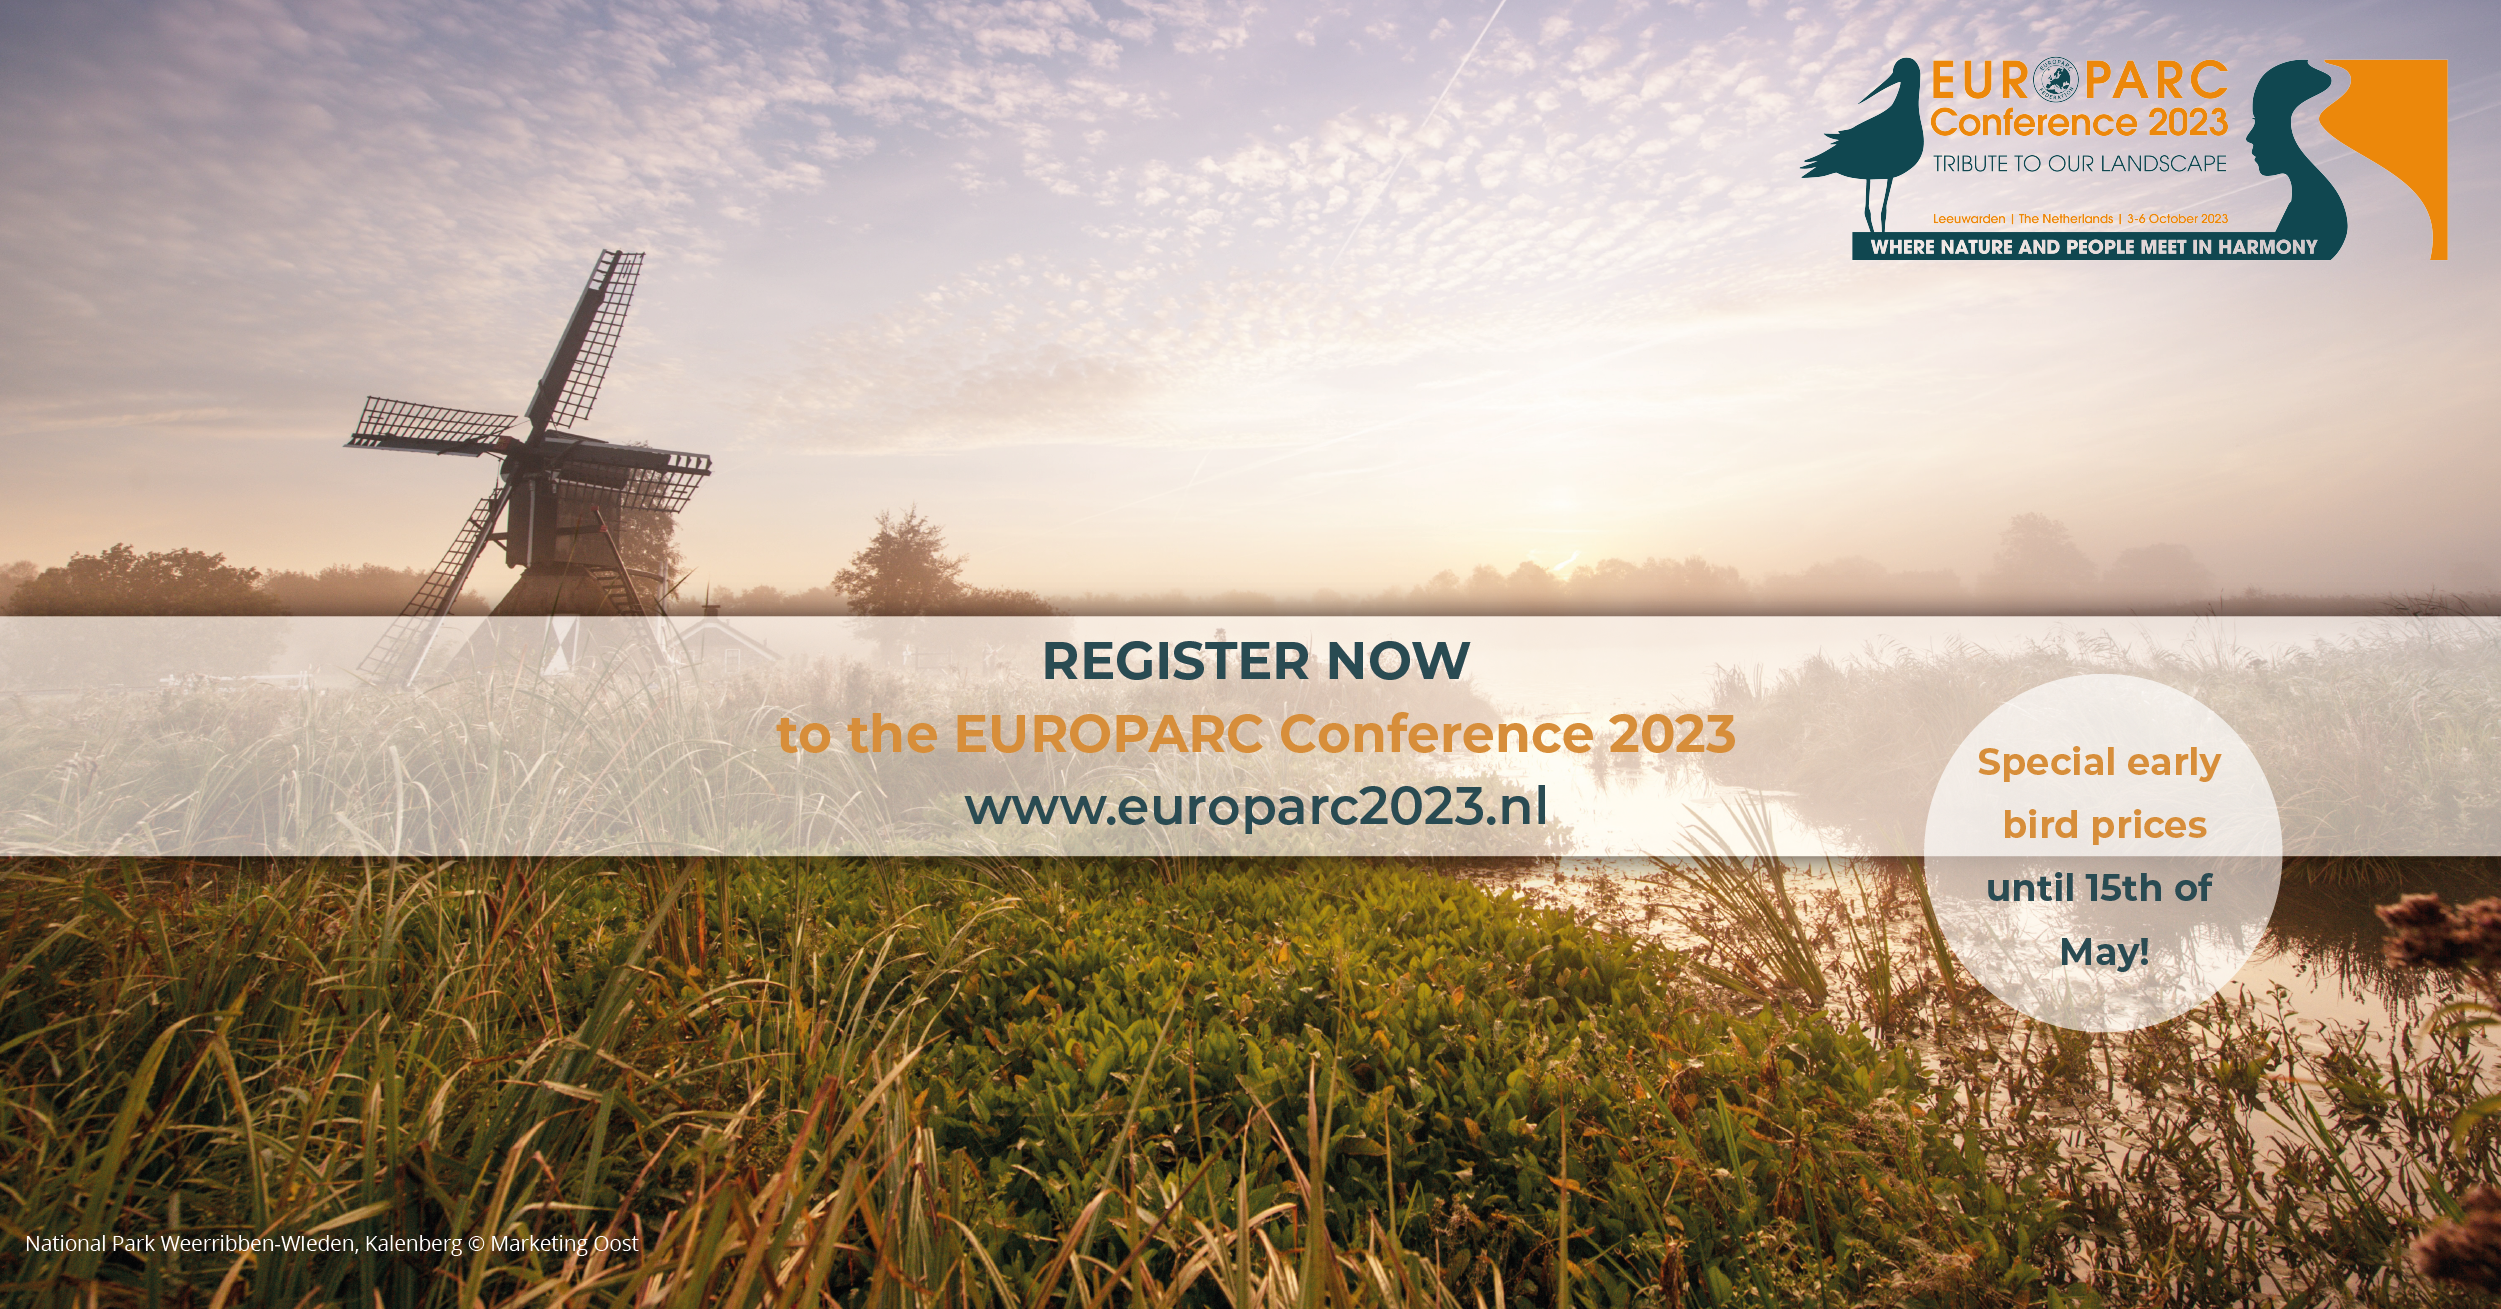 EUROPARC Conference 2023